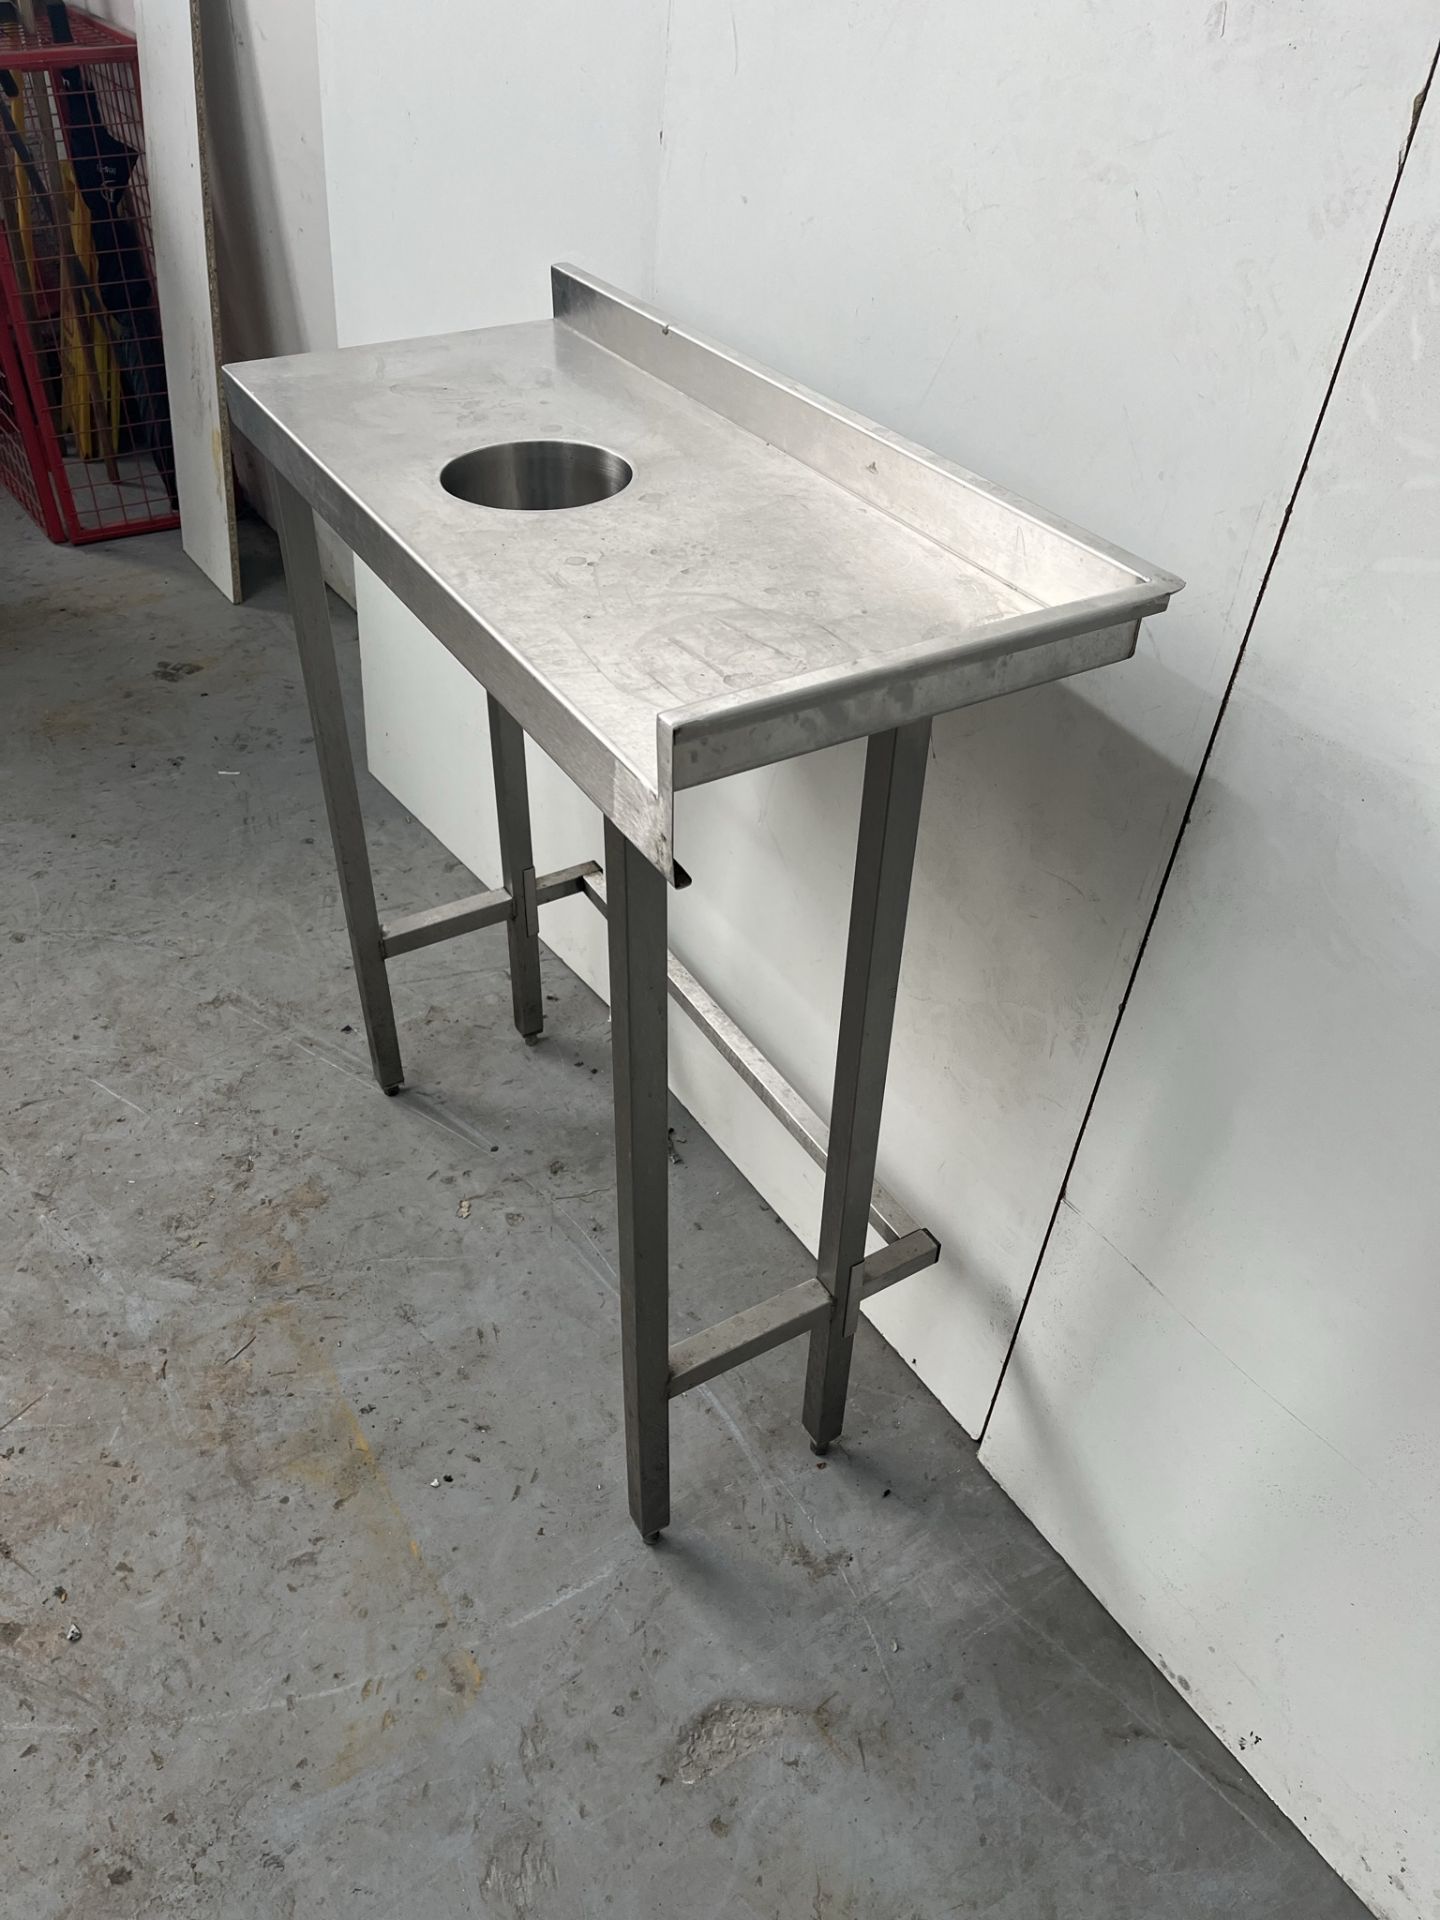 850mm Stainless Steel Catering Preperation Table With Waste Disposal Hole - Bild 4 aus 7